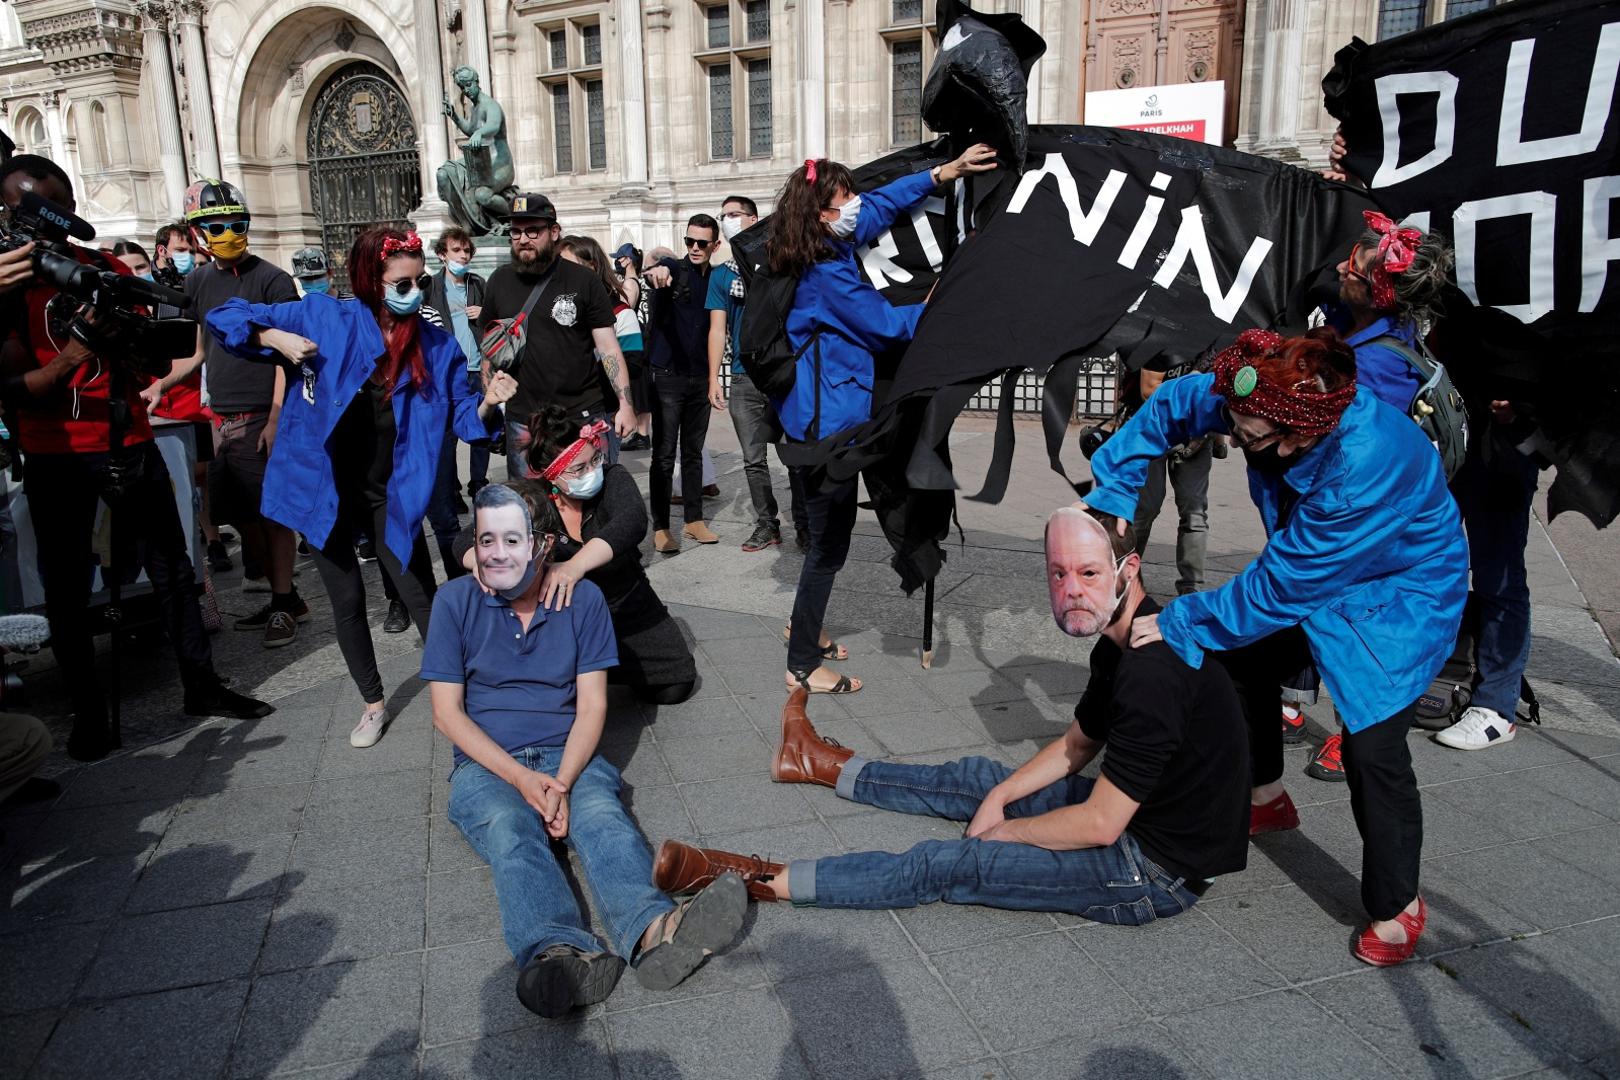 Feminist activists demonstrate against new government appointments in Paris Feminist activists wear masks depicting French Interior Minister Gerald Darmanin and Justice Minister Eric Dupond-Moretti during a demonstration against their appointments in the new French government, in front of the city hall in Paris, France, July 10, 2020. REUTERS/Benoit Tessier BENOIT TESSIER